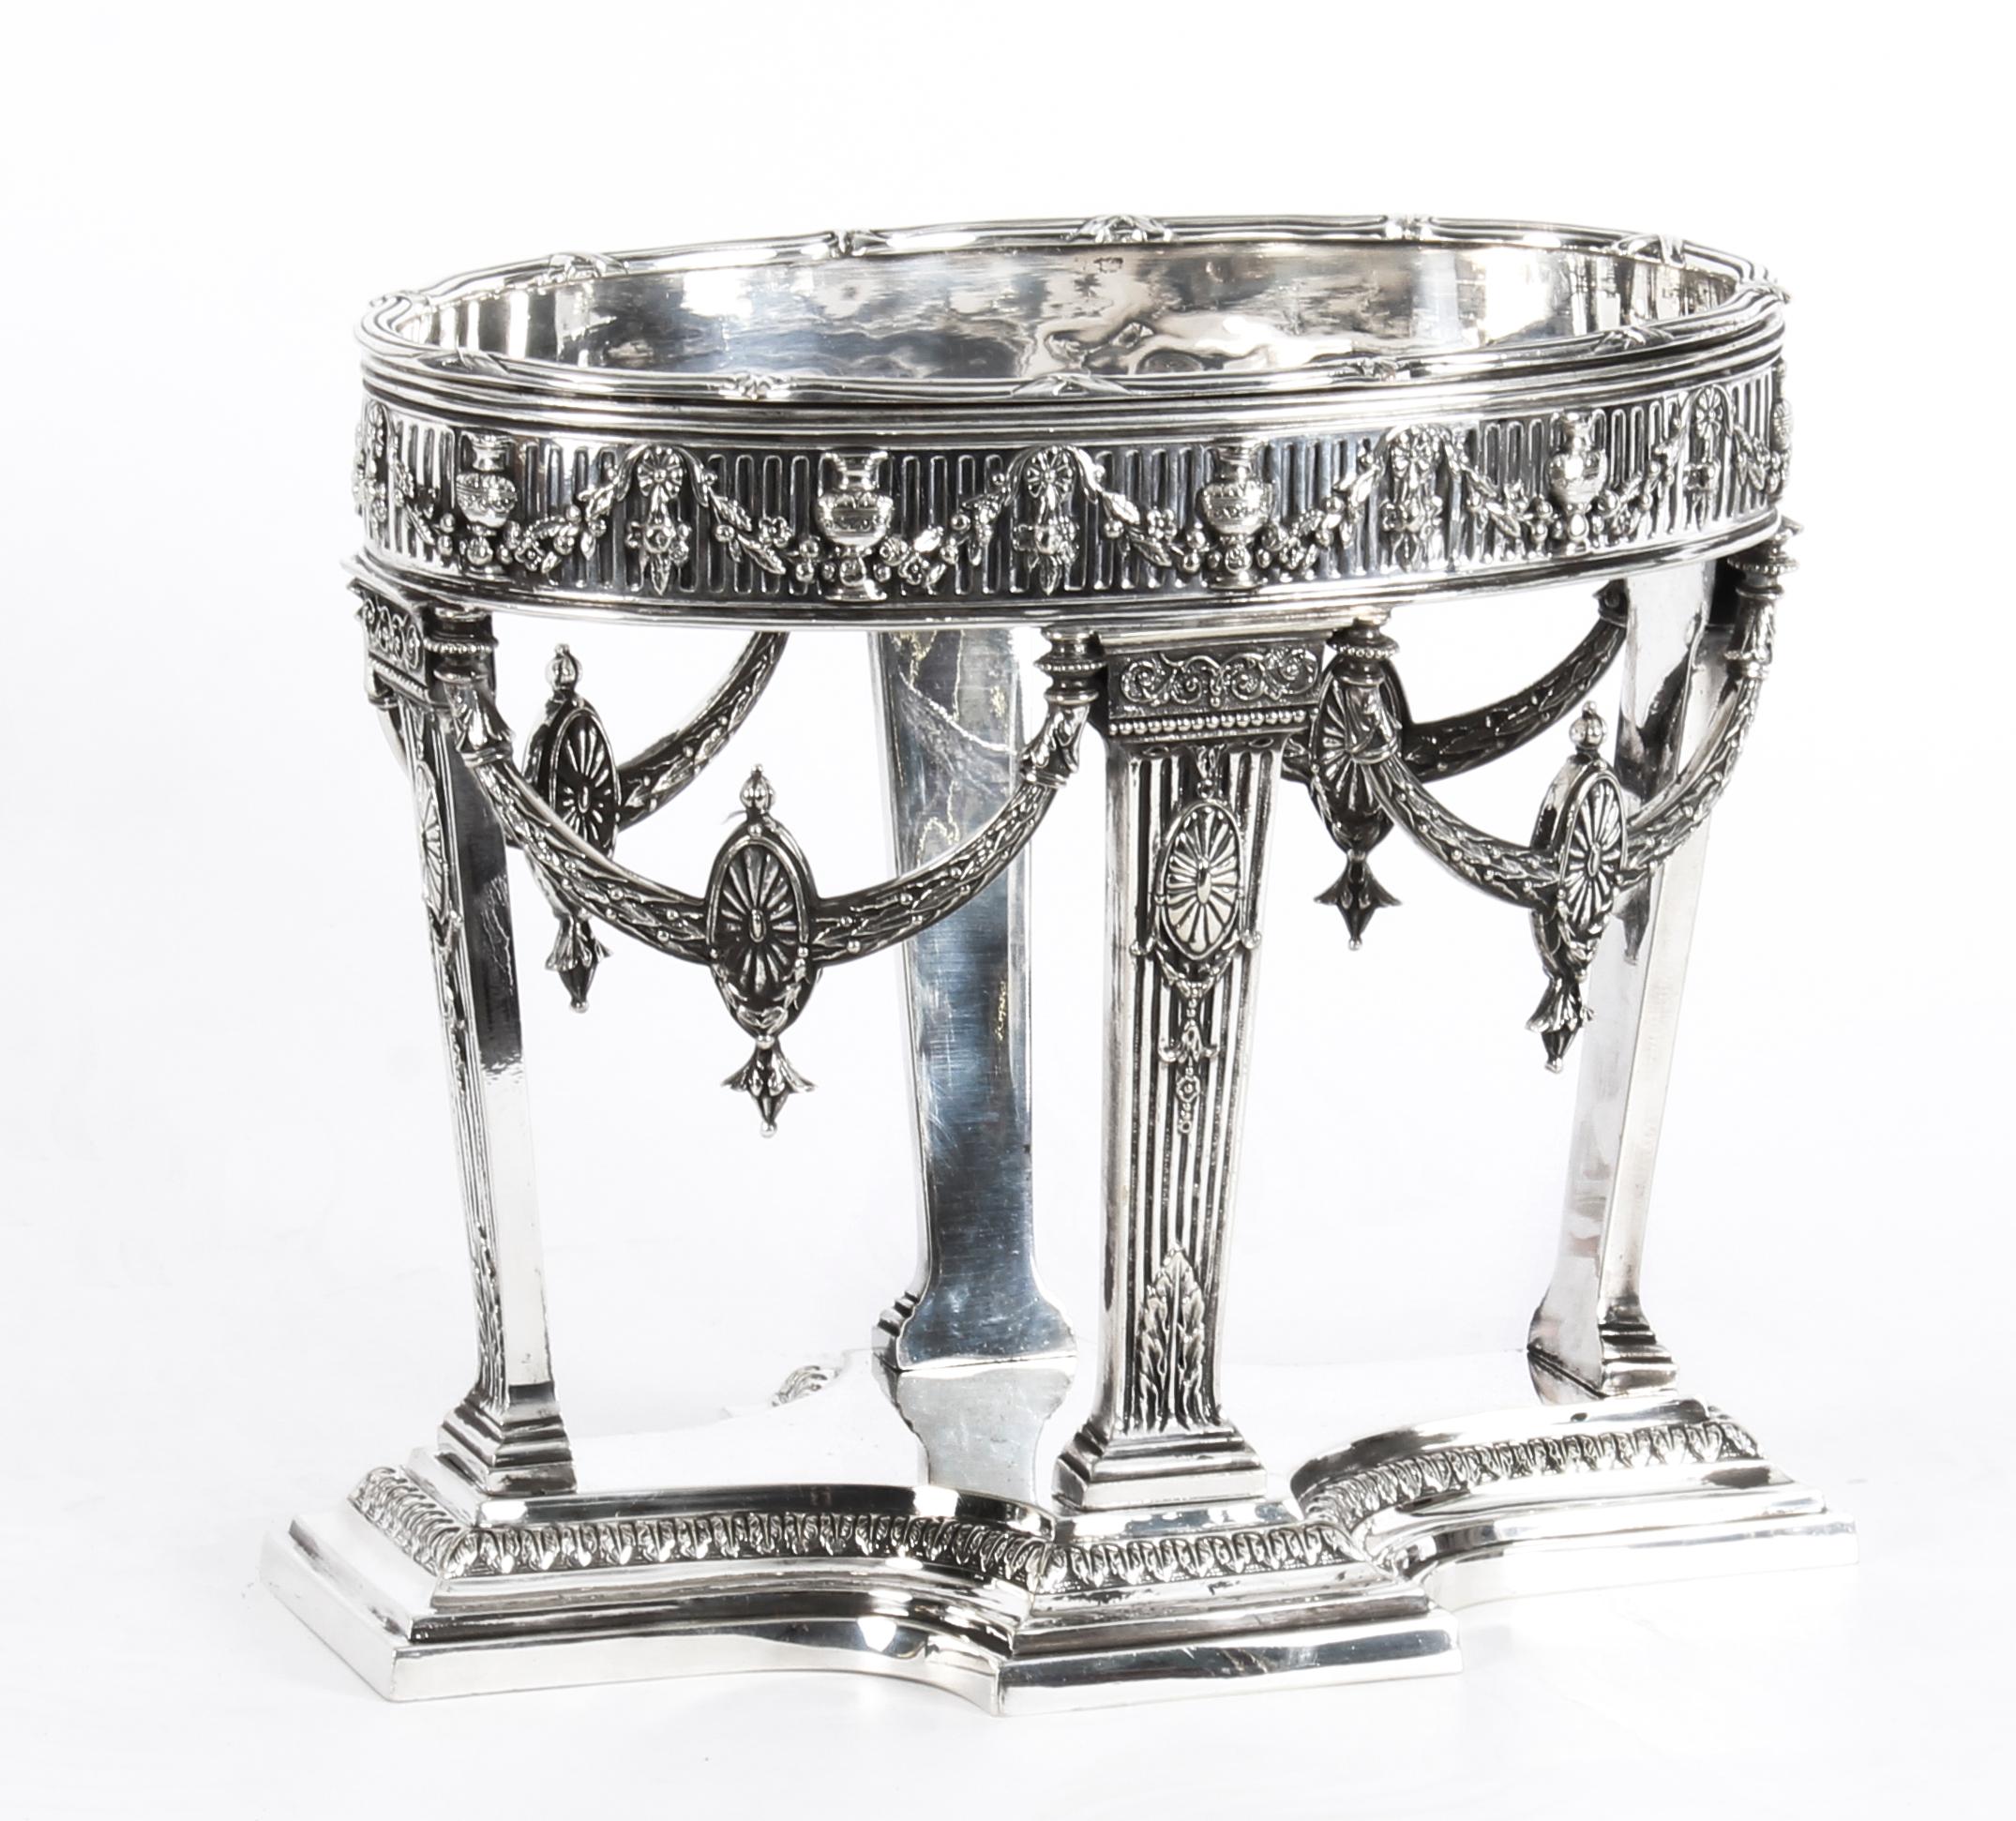 Antique Victorian Silver Plate Centrepiece by Horace Woodward and Co., 1876 13